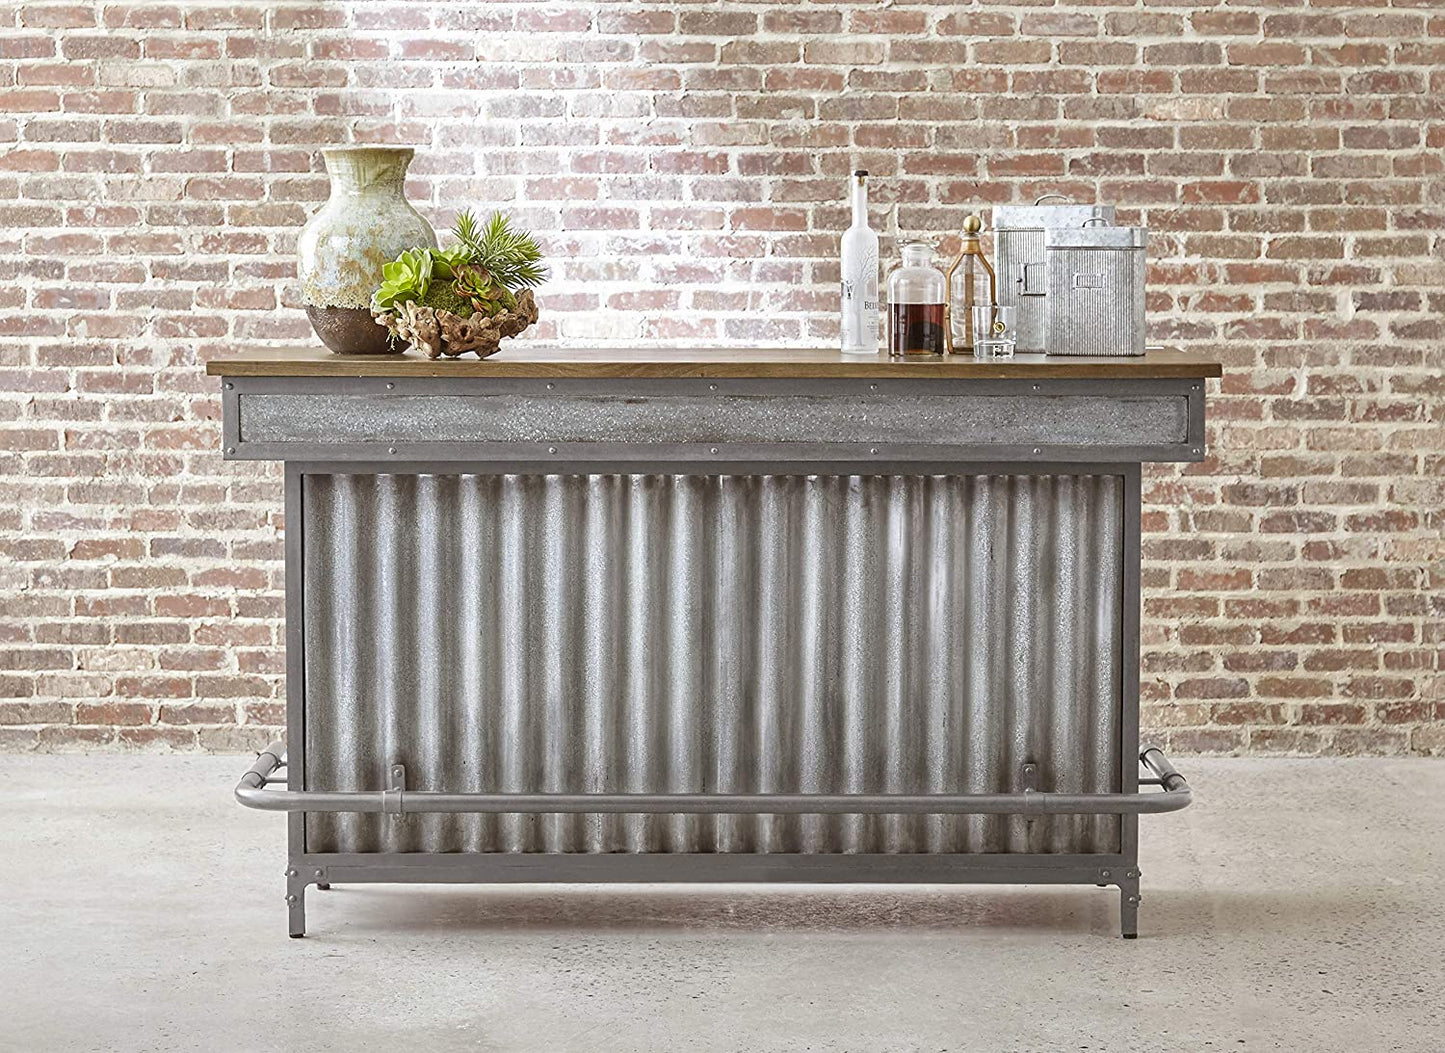 Bar Cabinet: Wood and Metal Home Bar, Silver 